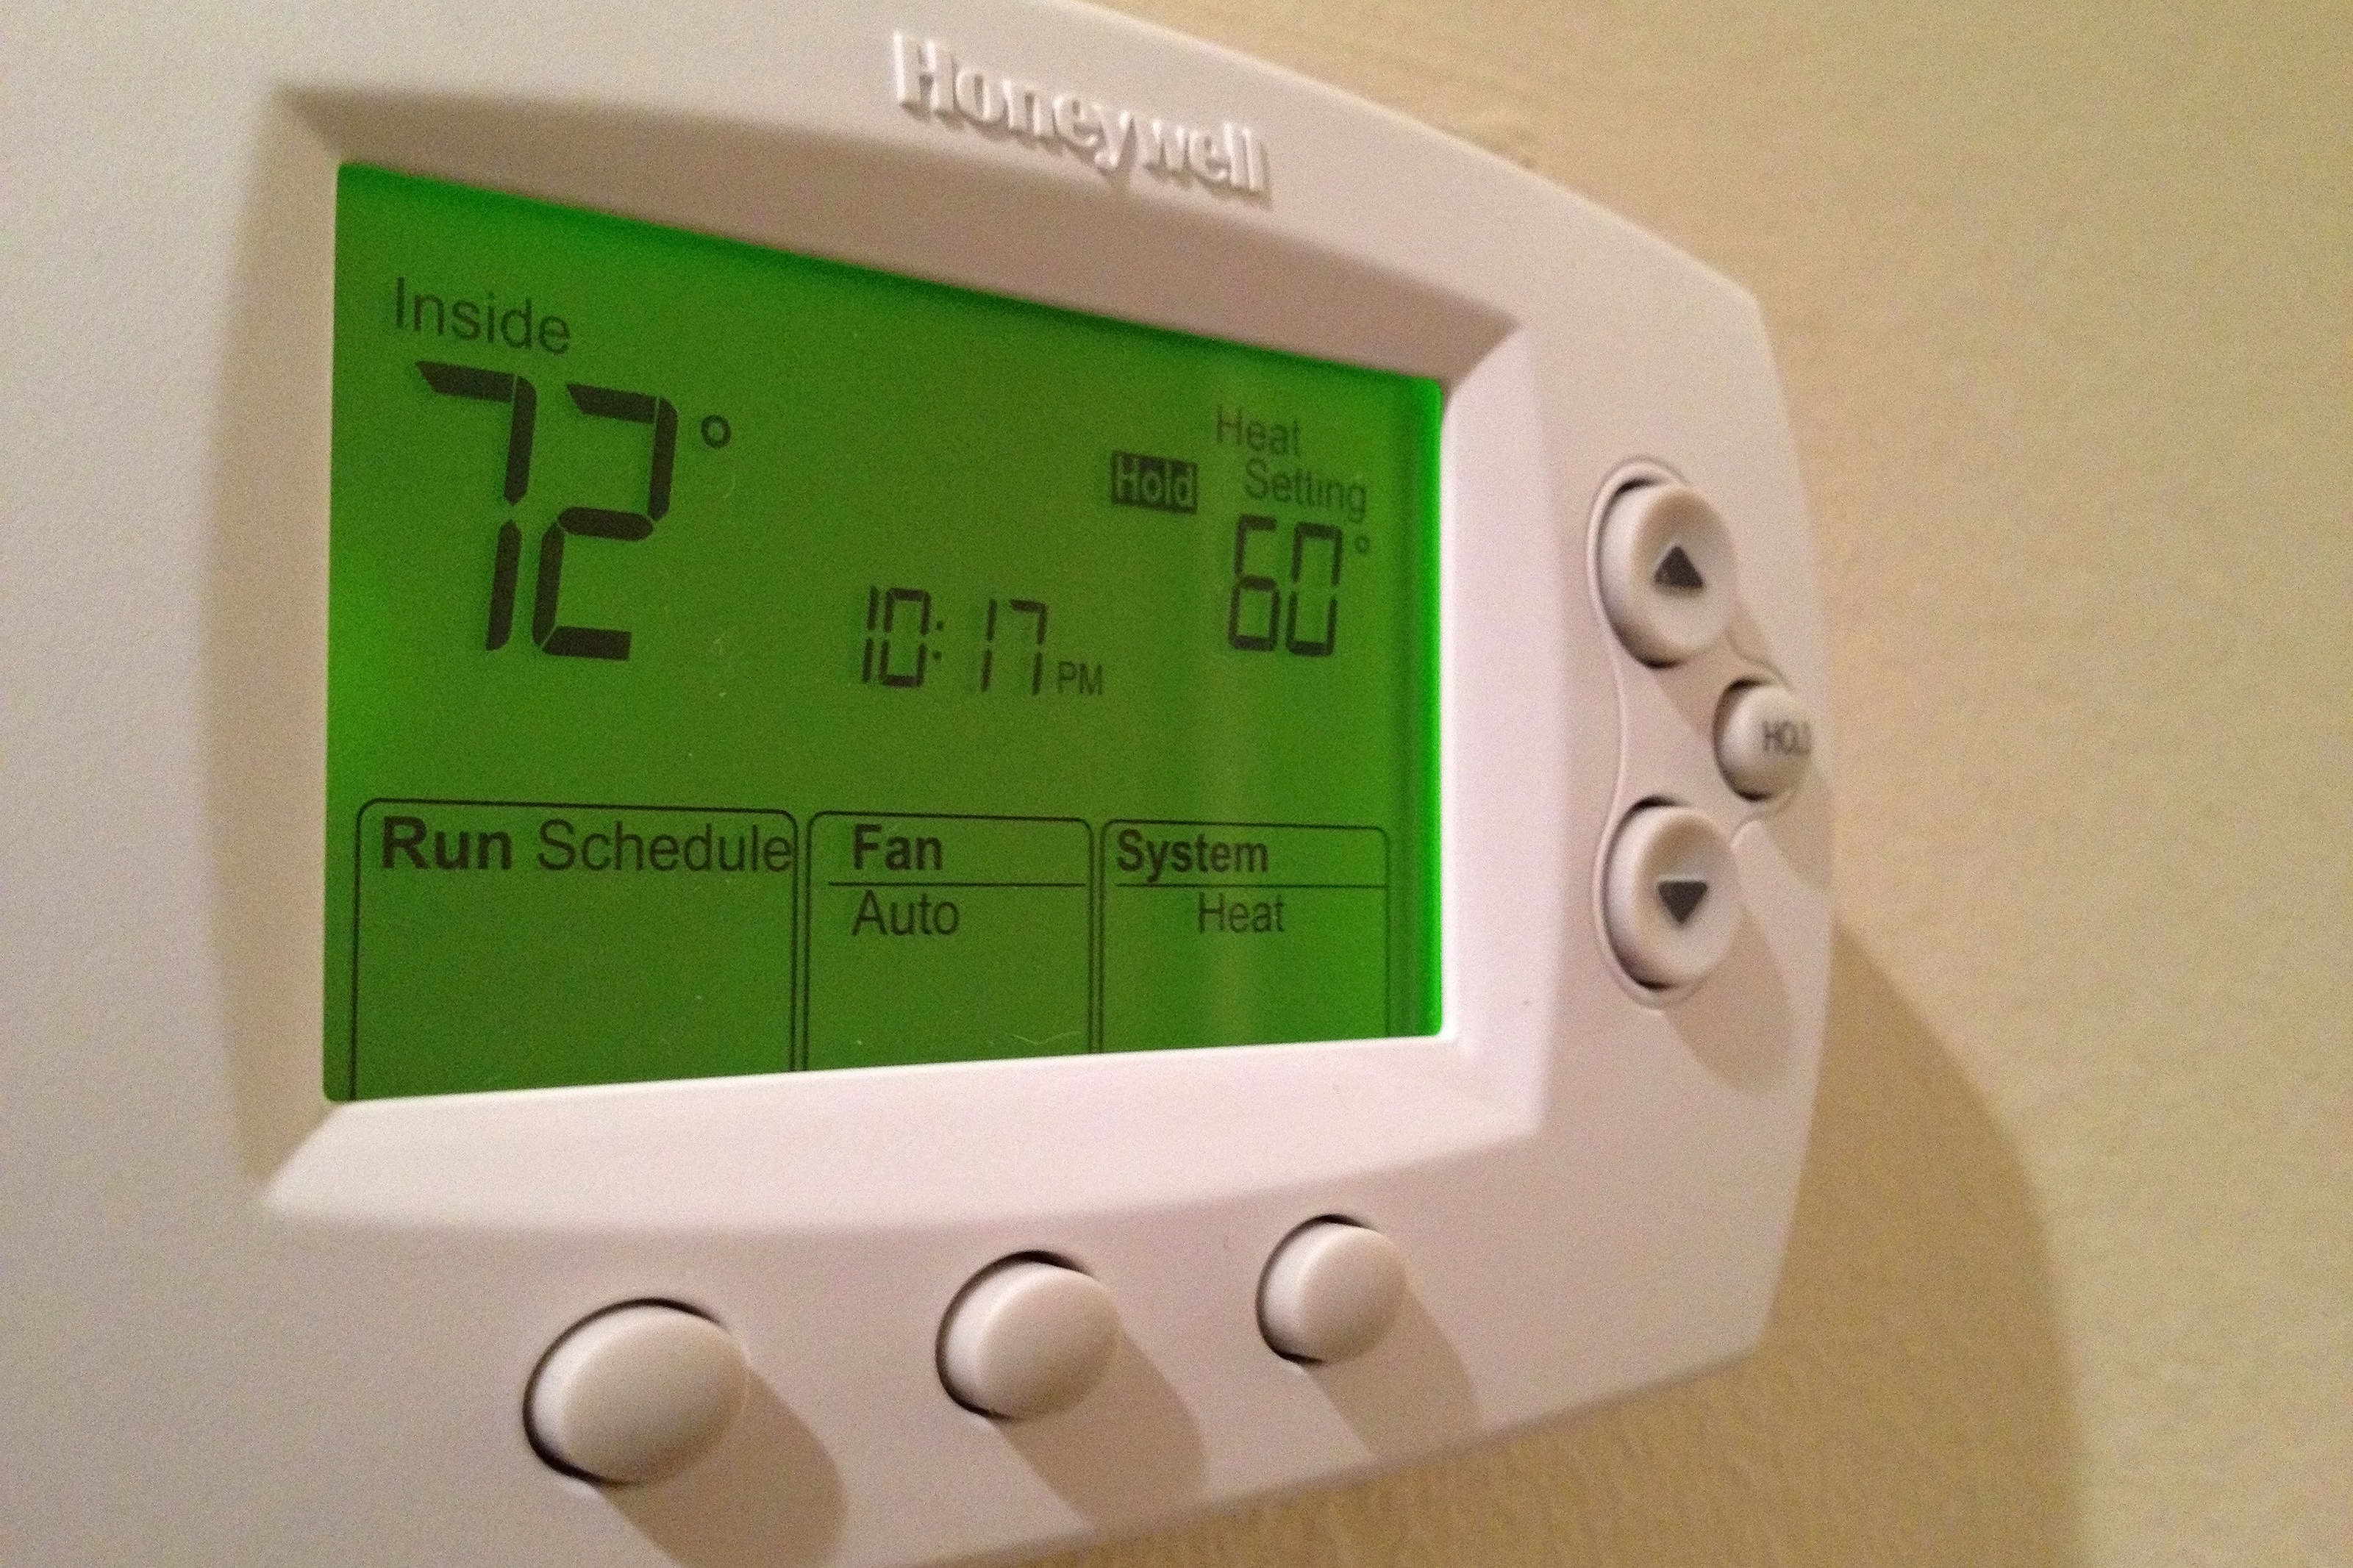 What Is The Right Way Of Using a Thermostat?